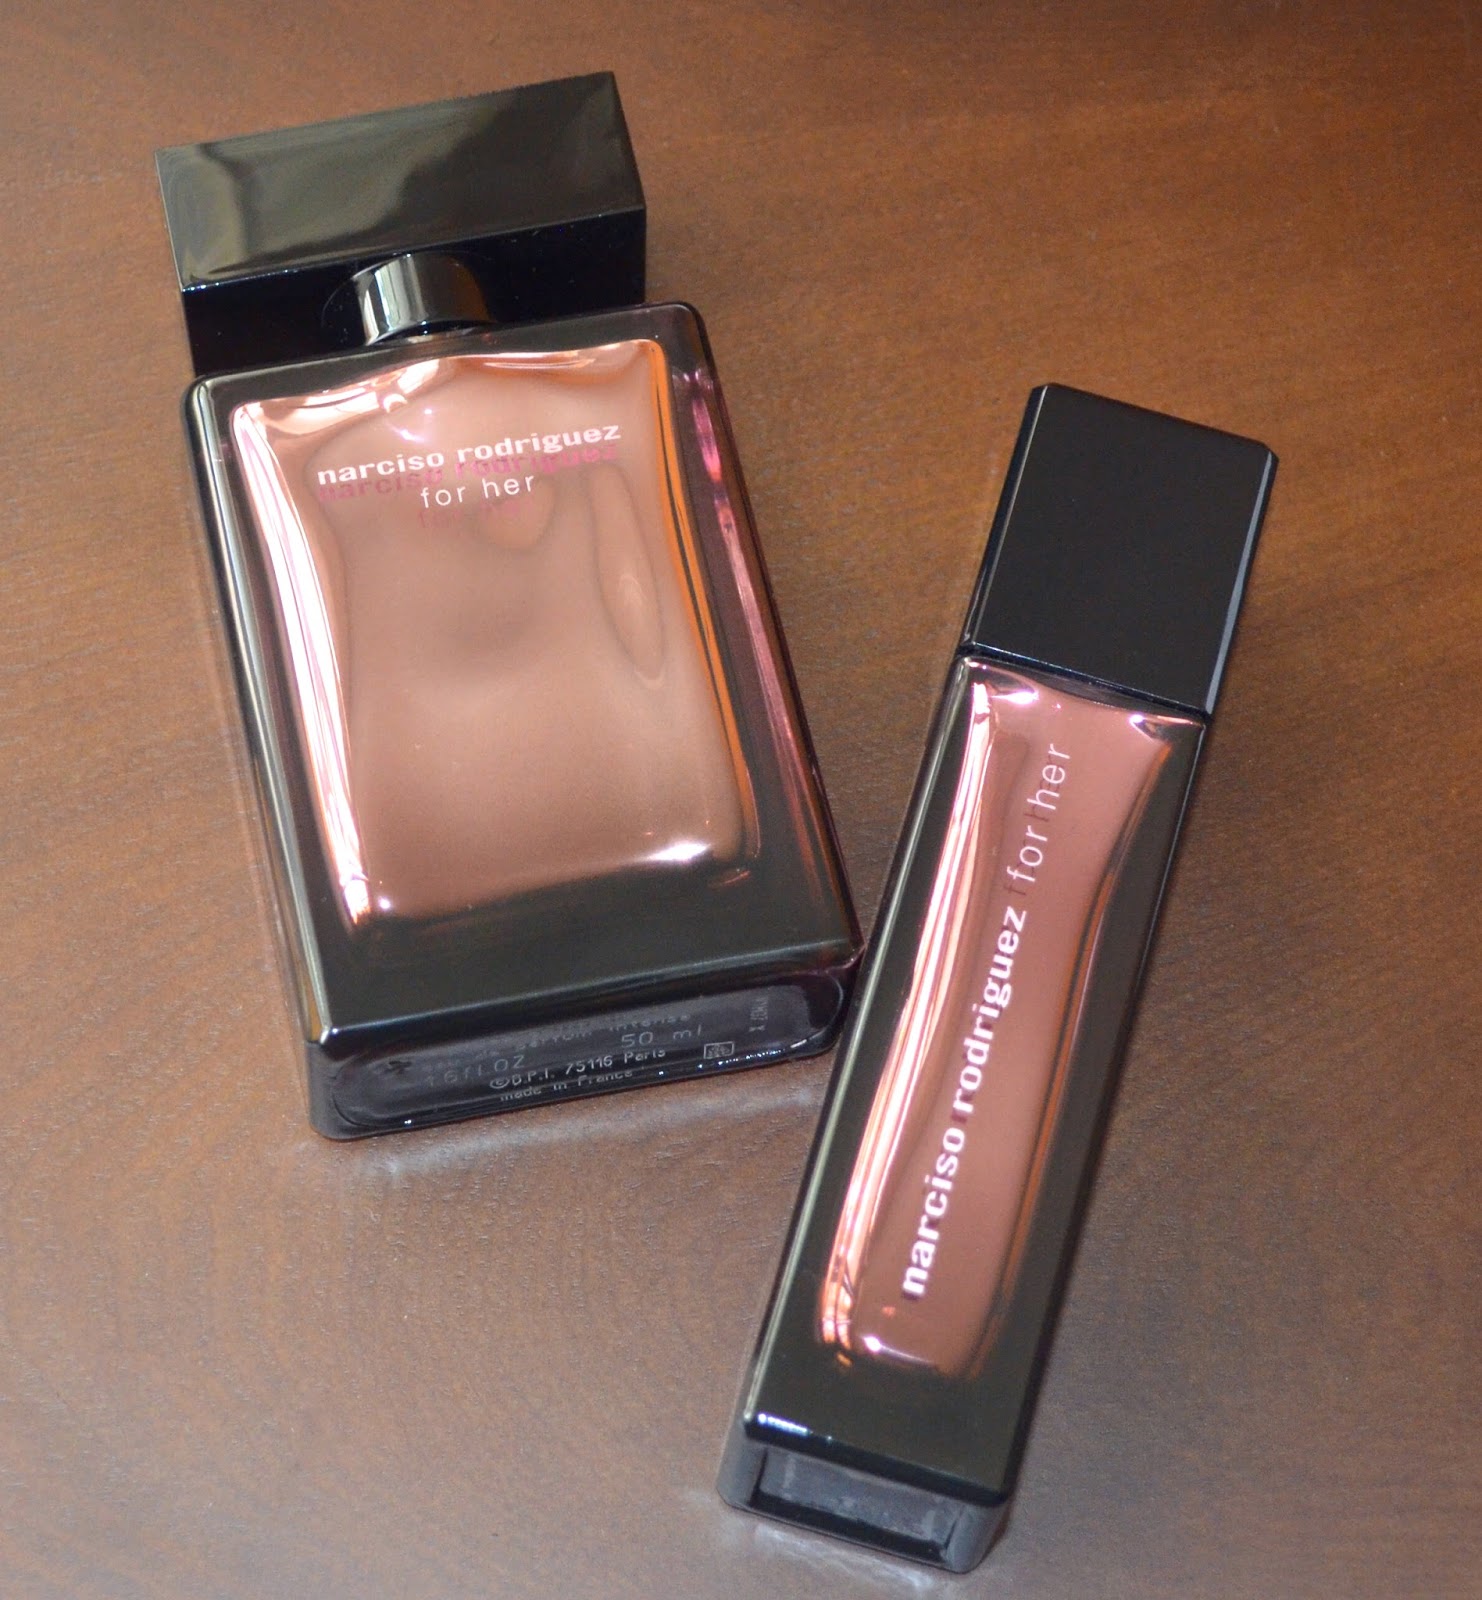 buffet Objector Umeki Narciso Rodriguez For Her - Musc Intense' Eau de Parfum - of the comely